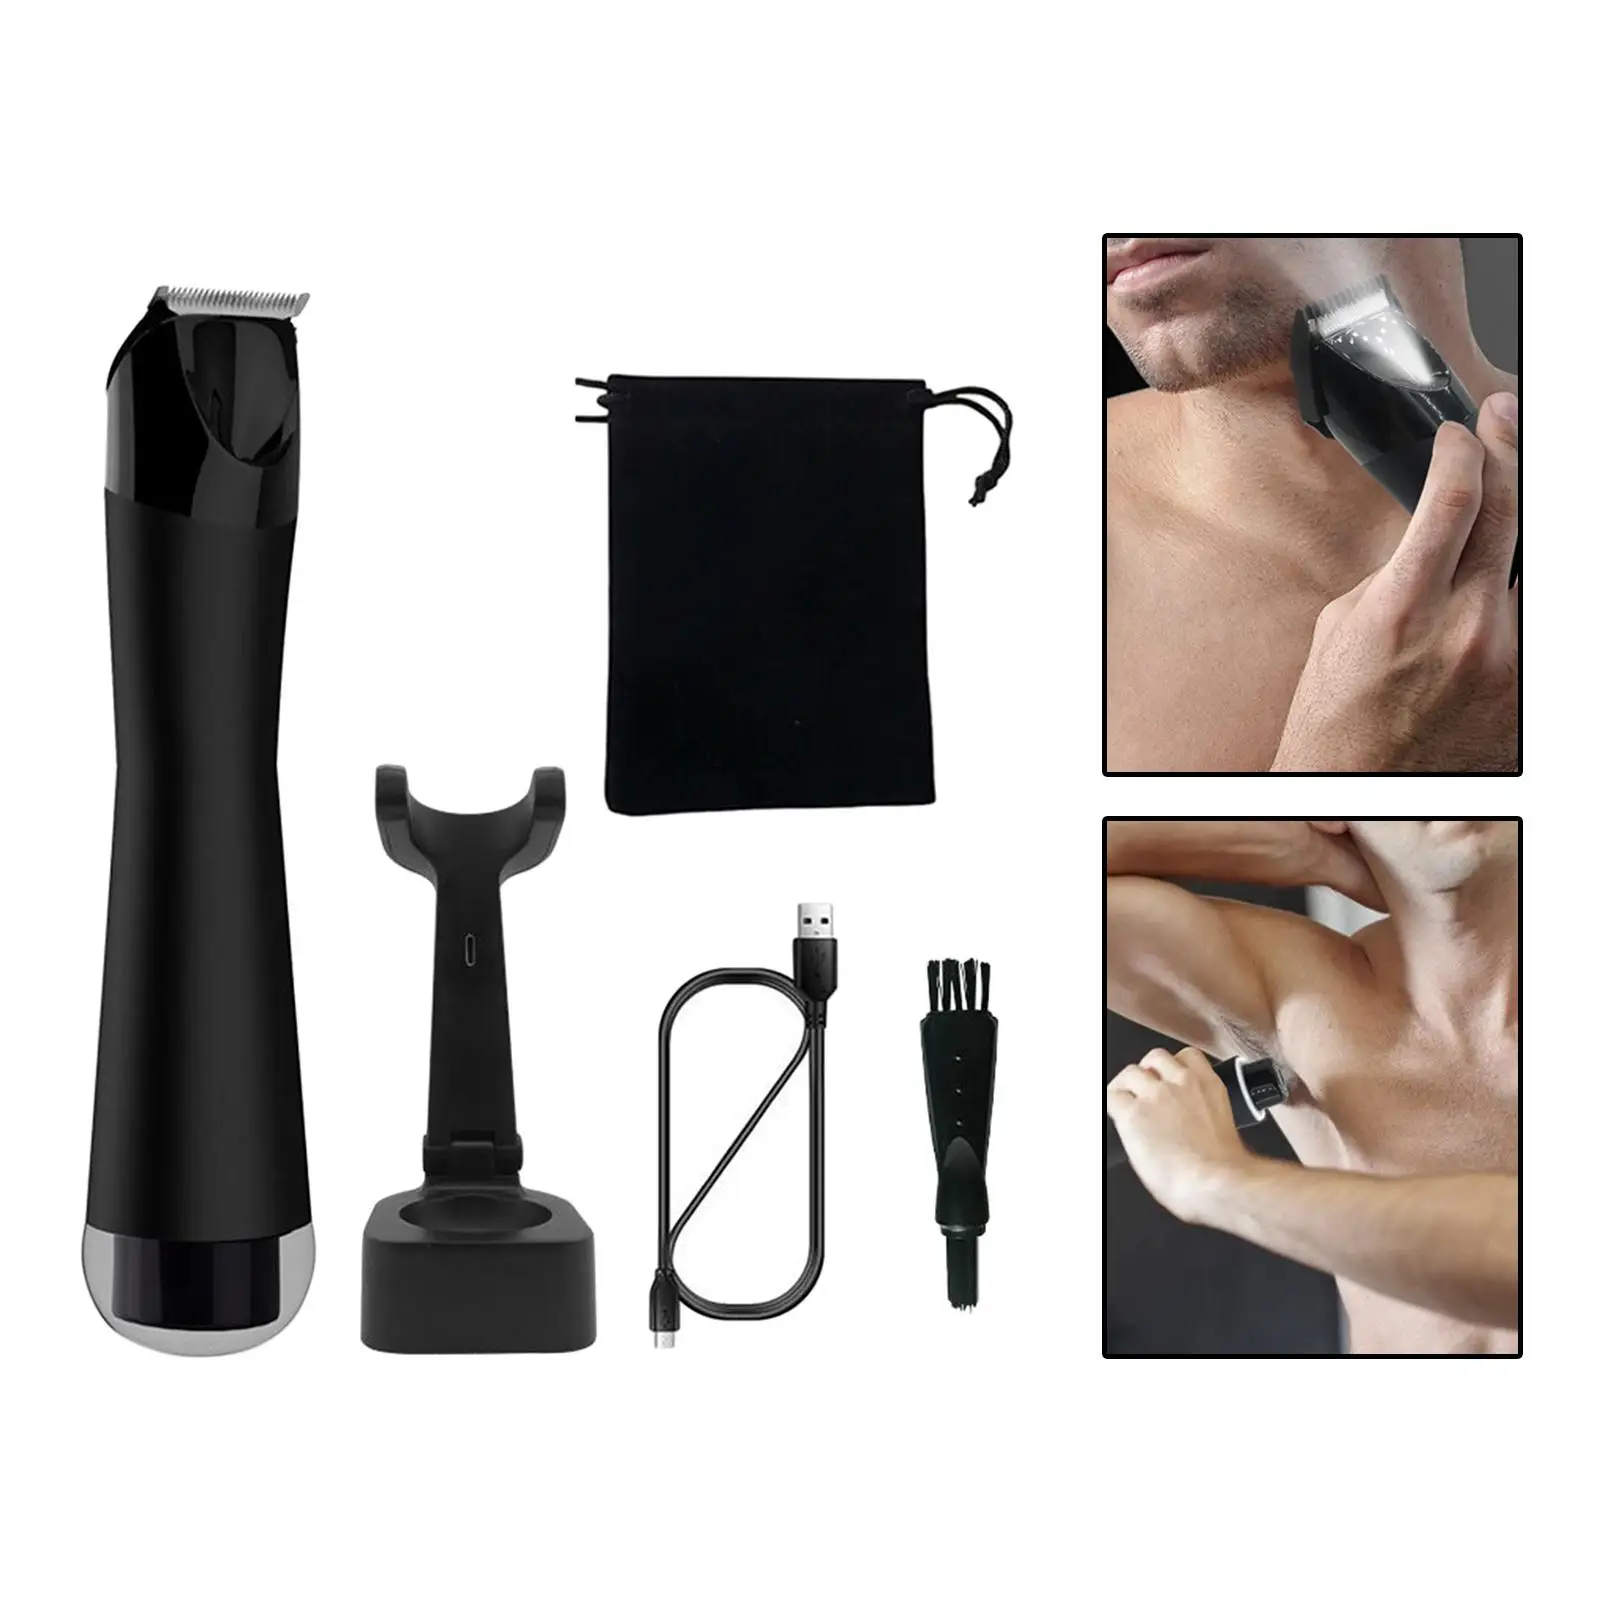 Electric Groin Hair Shaver for Men, Rechargeable IPX7 Waterproof Washable